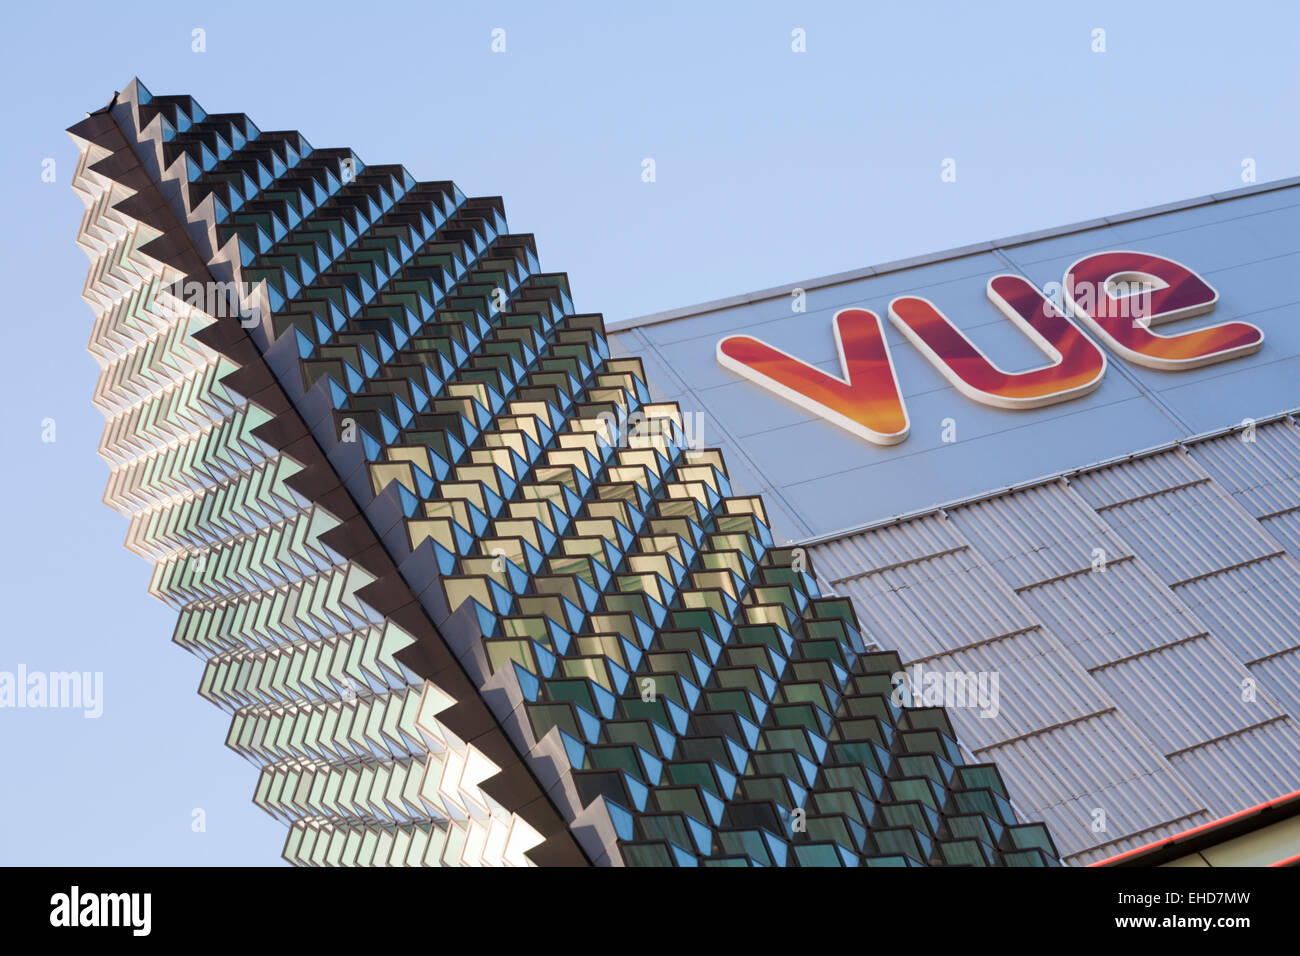 Vue cinema sign and structure at Westfield Shopping Centre, Stratford, London Stock Photo